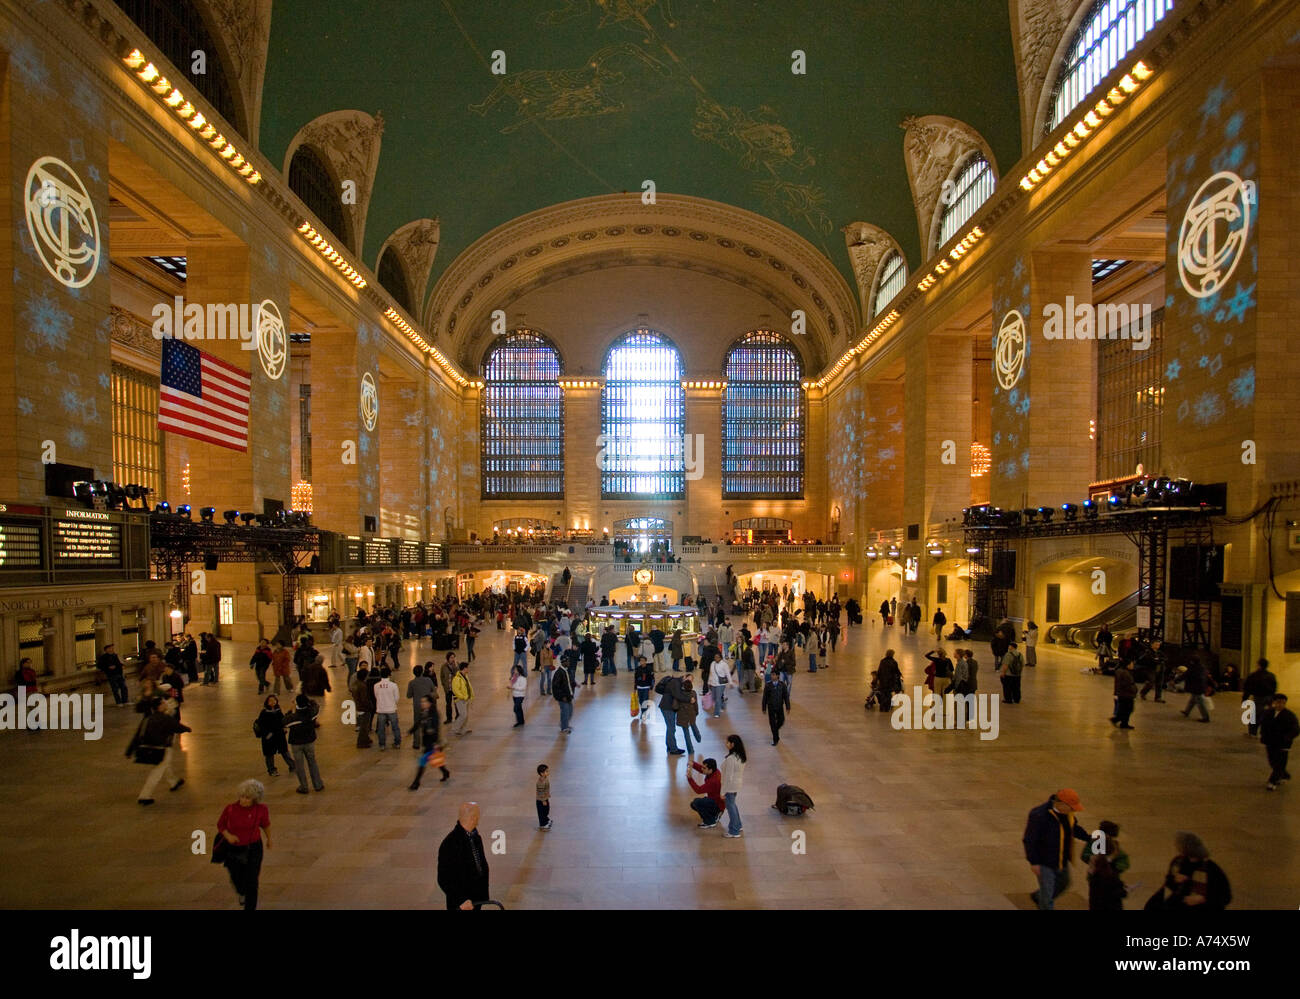 Grand Central station concourse showing crowds and passers by milling around Stock Photo